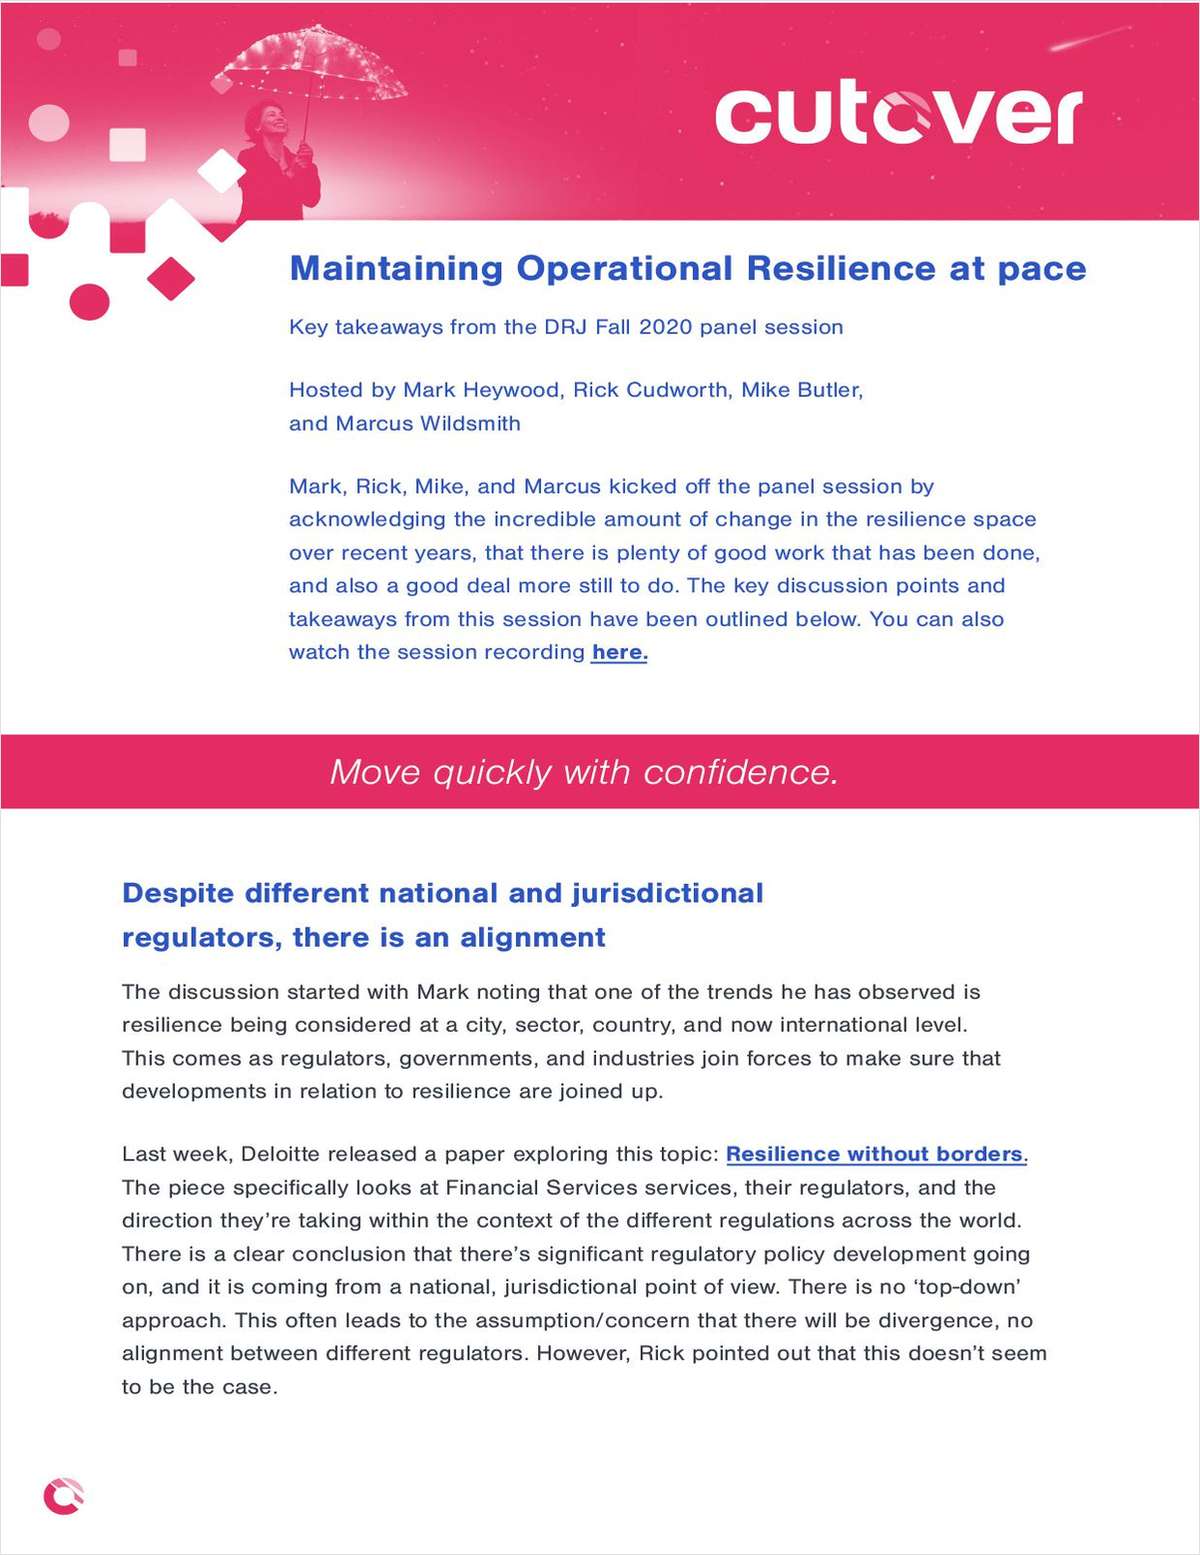 Maintaining Operational Resilience at pace